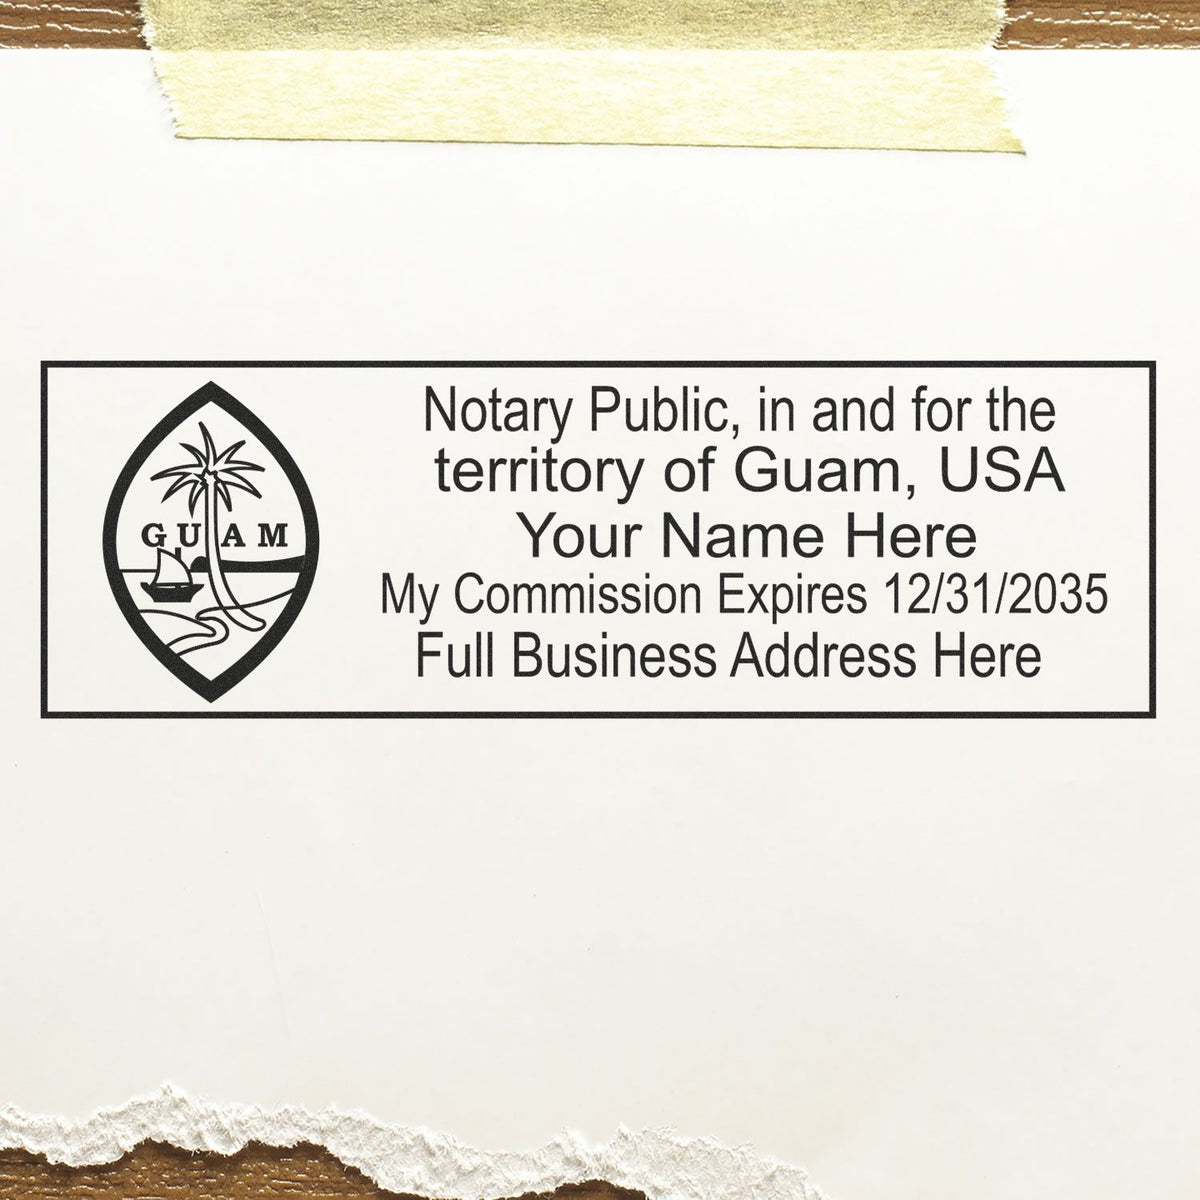 An alternative view of the PSI Guam Notary Stamp stamped on a sheet of paper showing the image in use